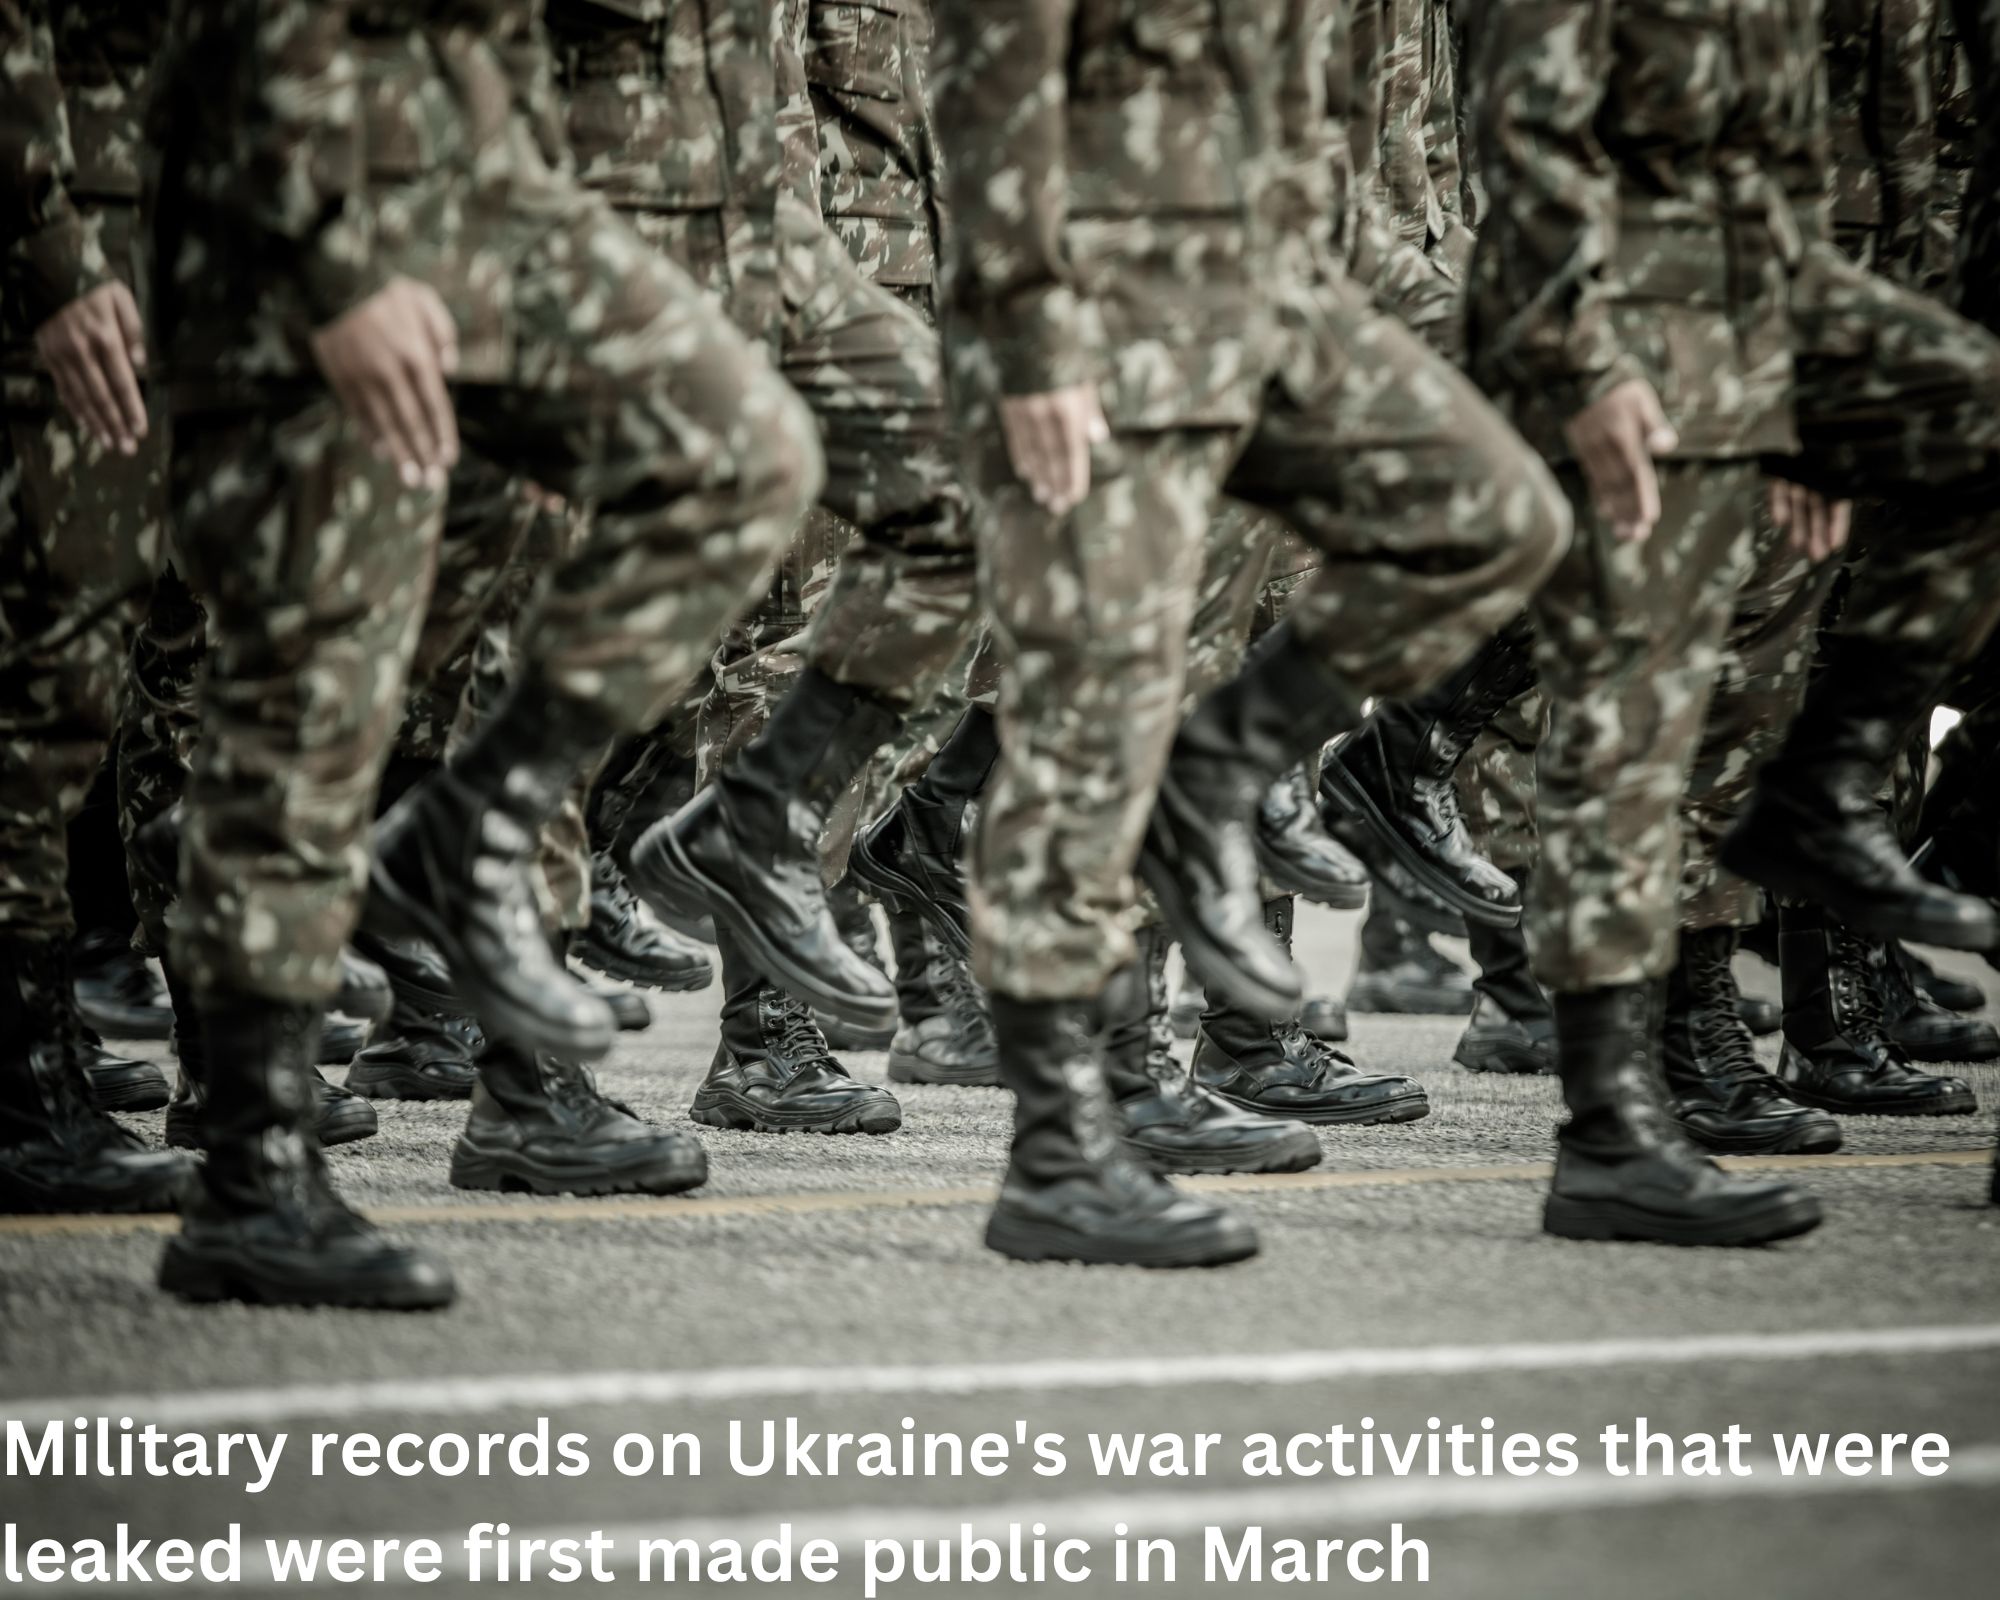 Military records on Ukraine's war activities that were leaked were first made public in March